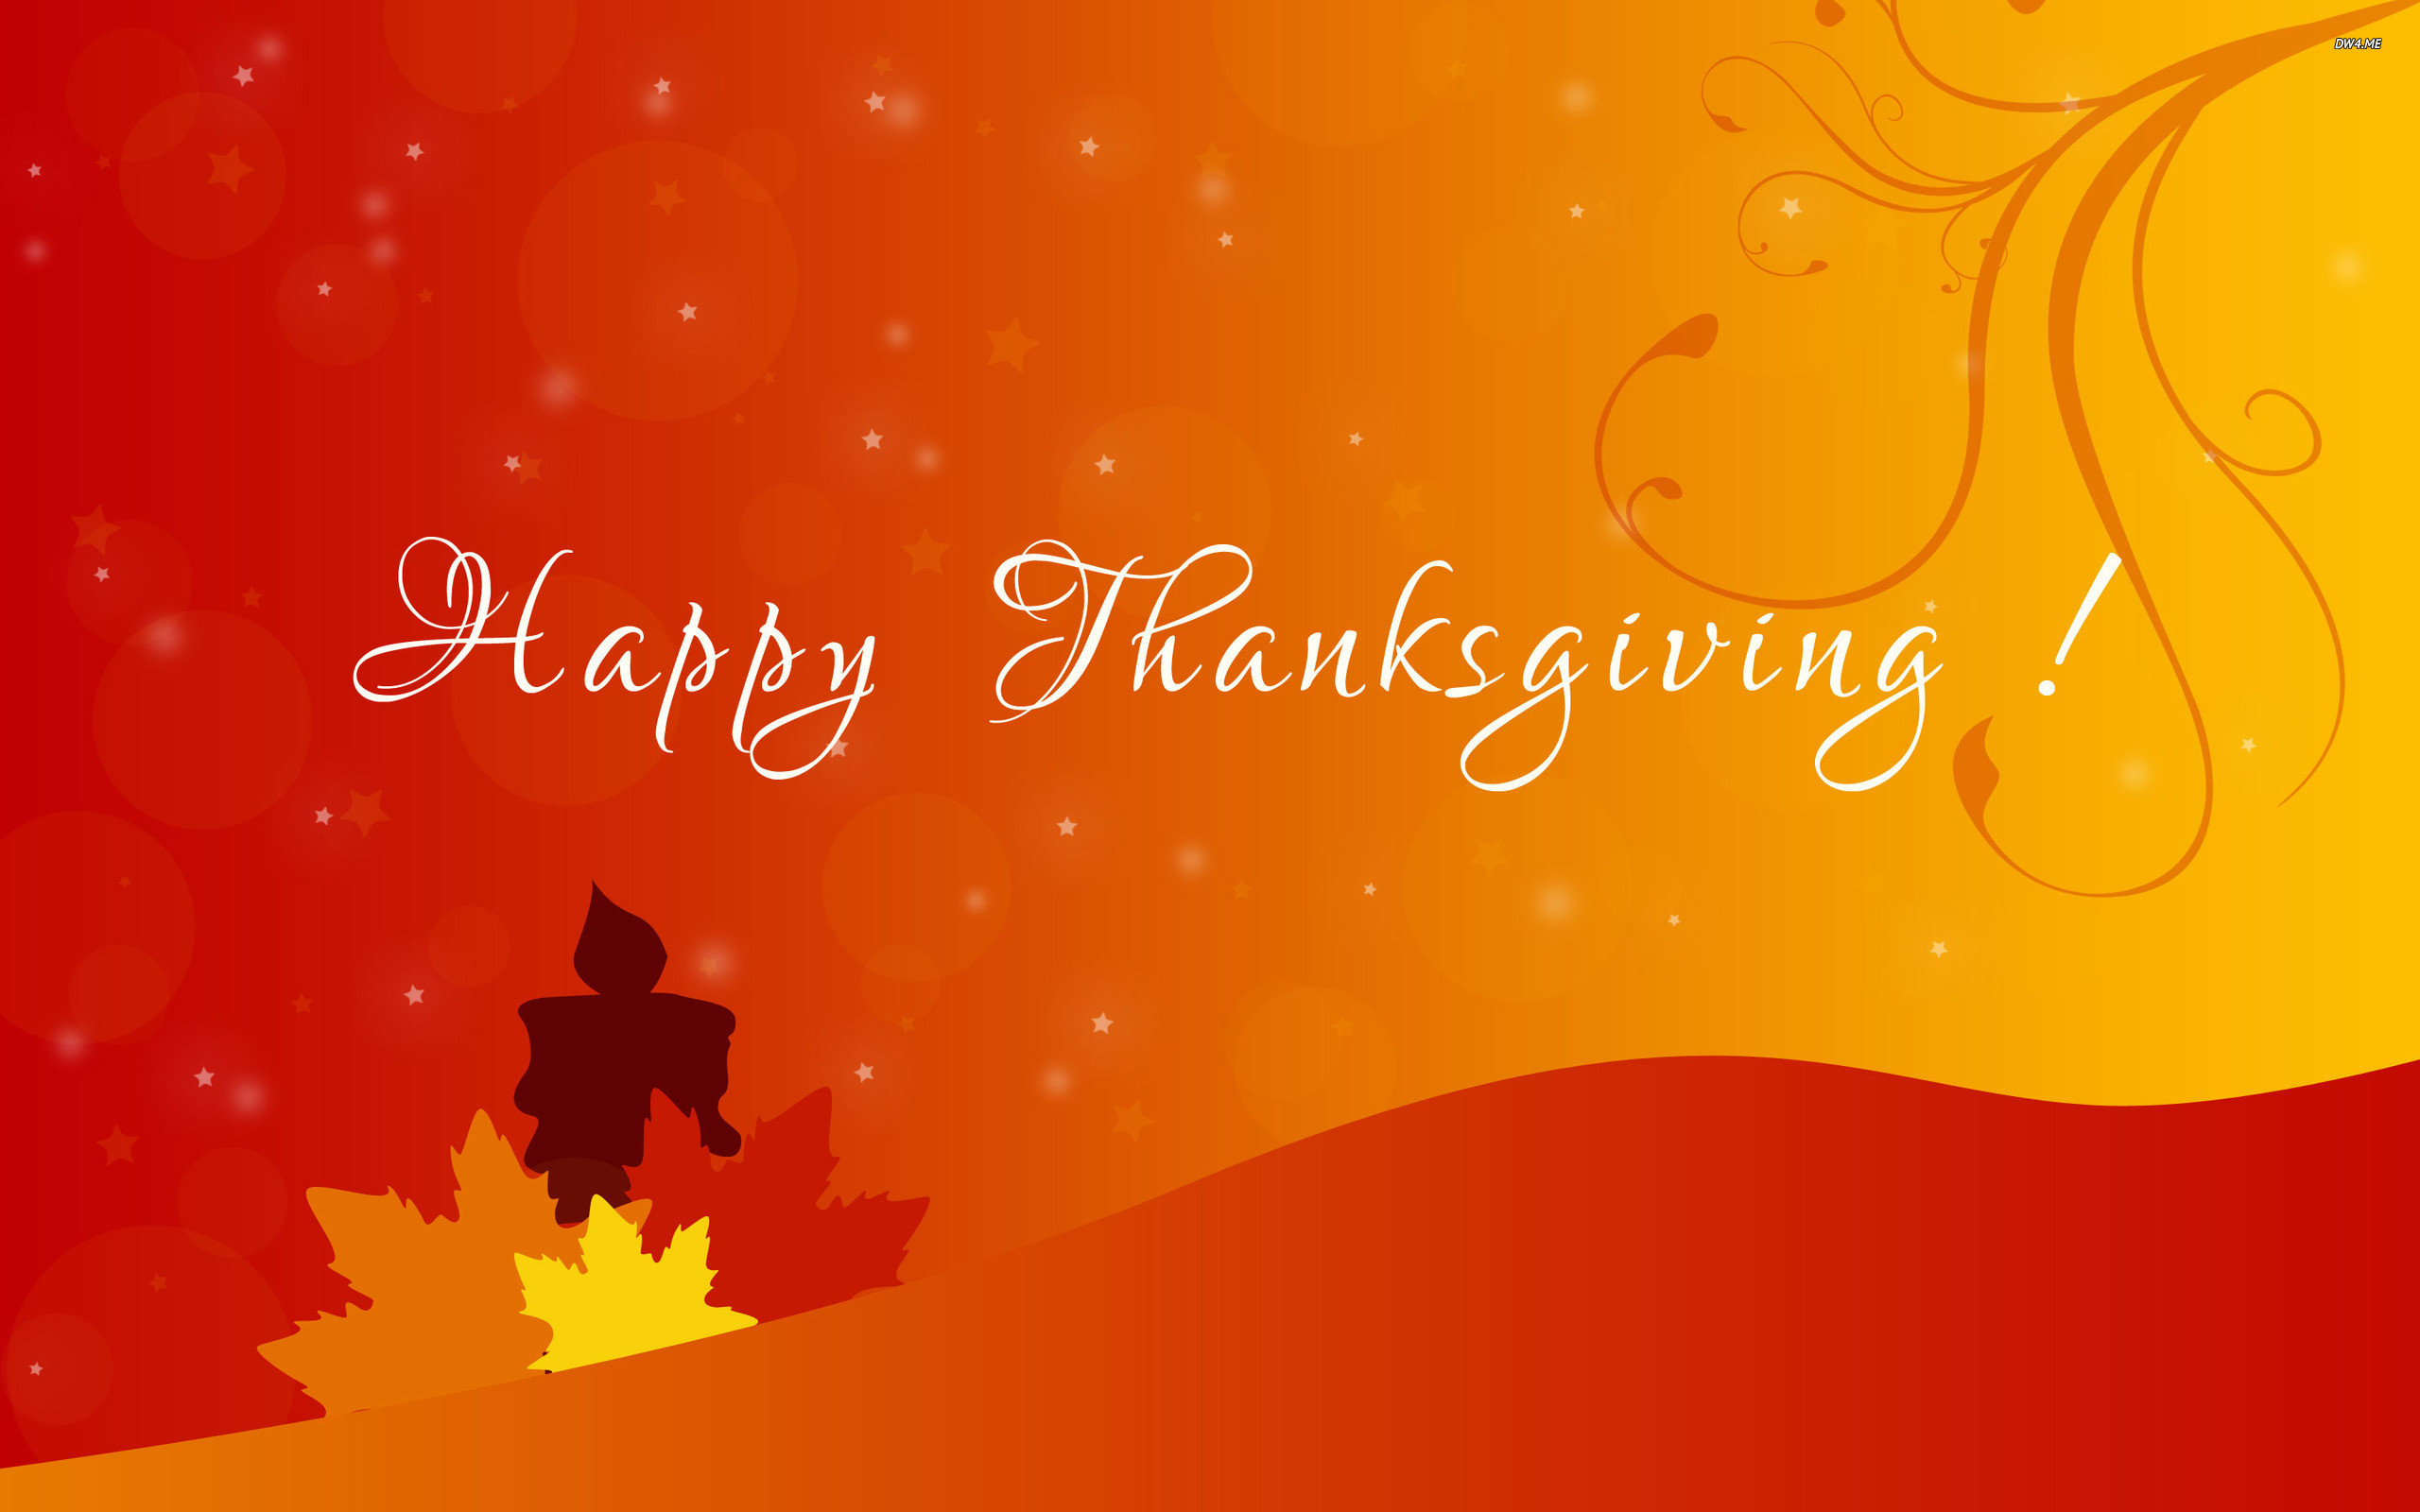 2560x1600 happy thanksgiving background wallpaper hd for desktop cool images .